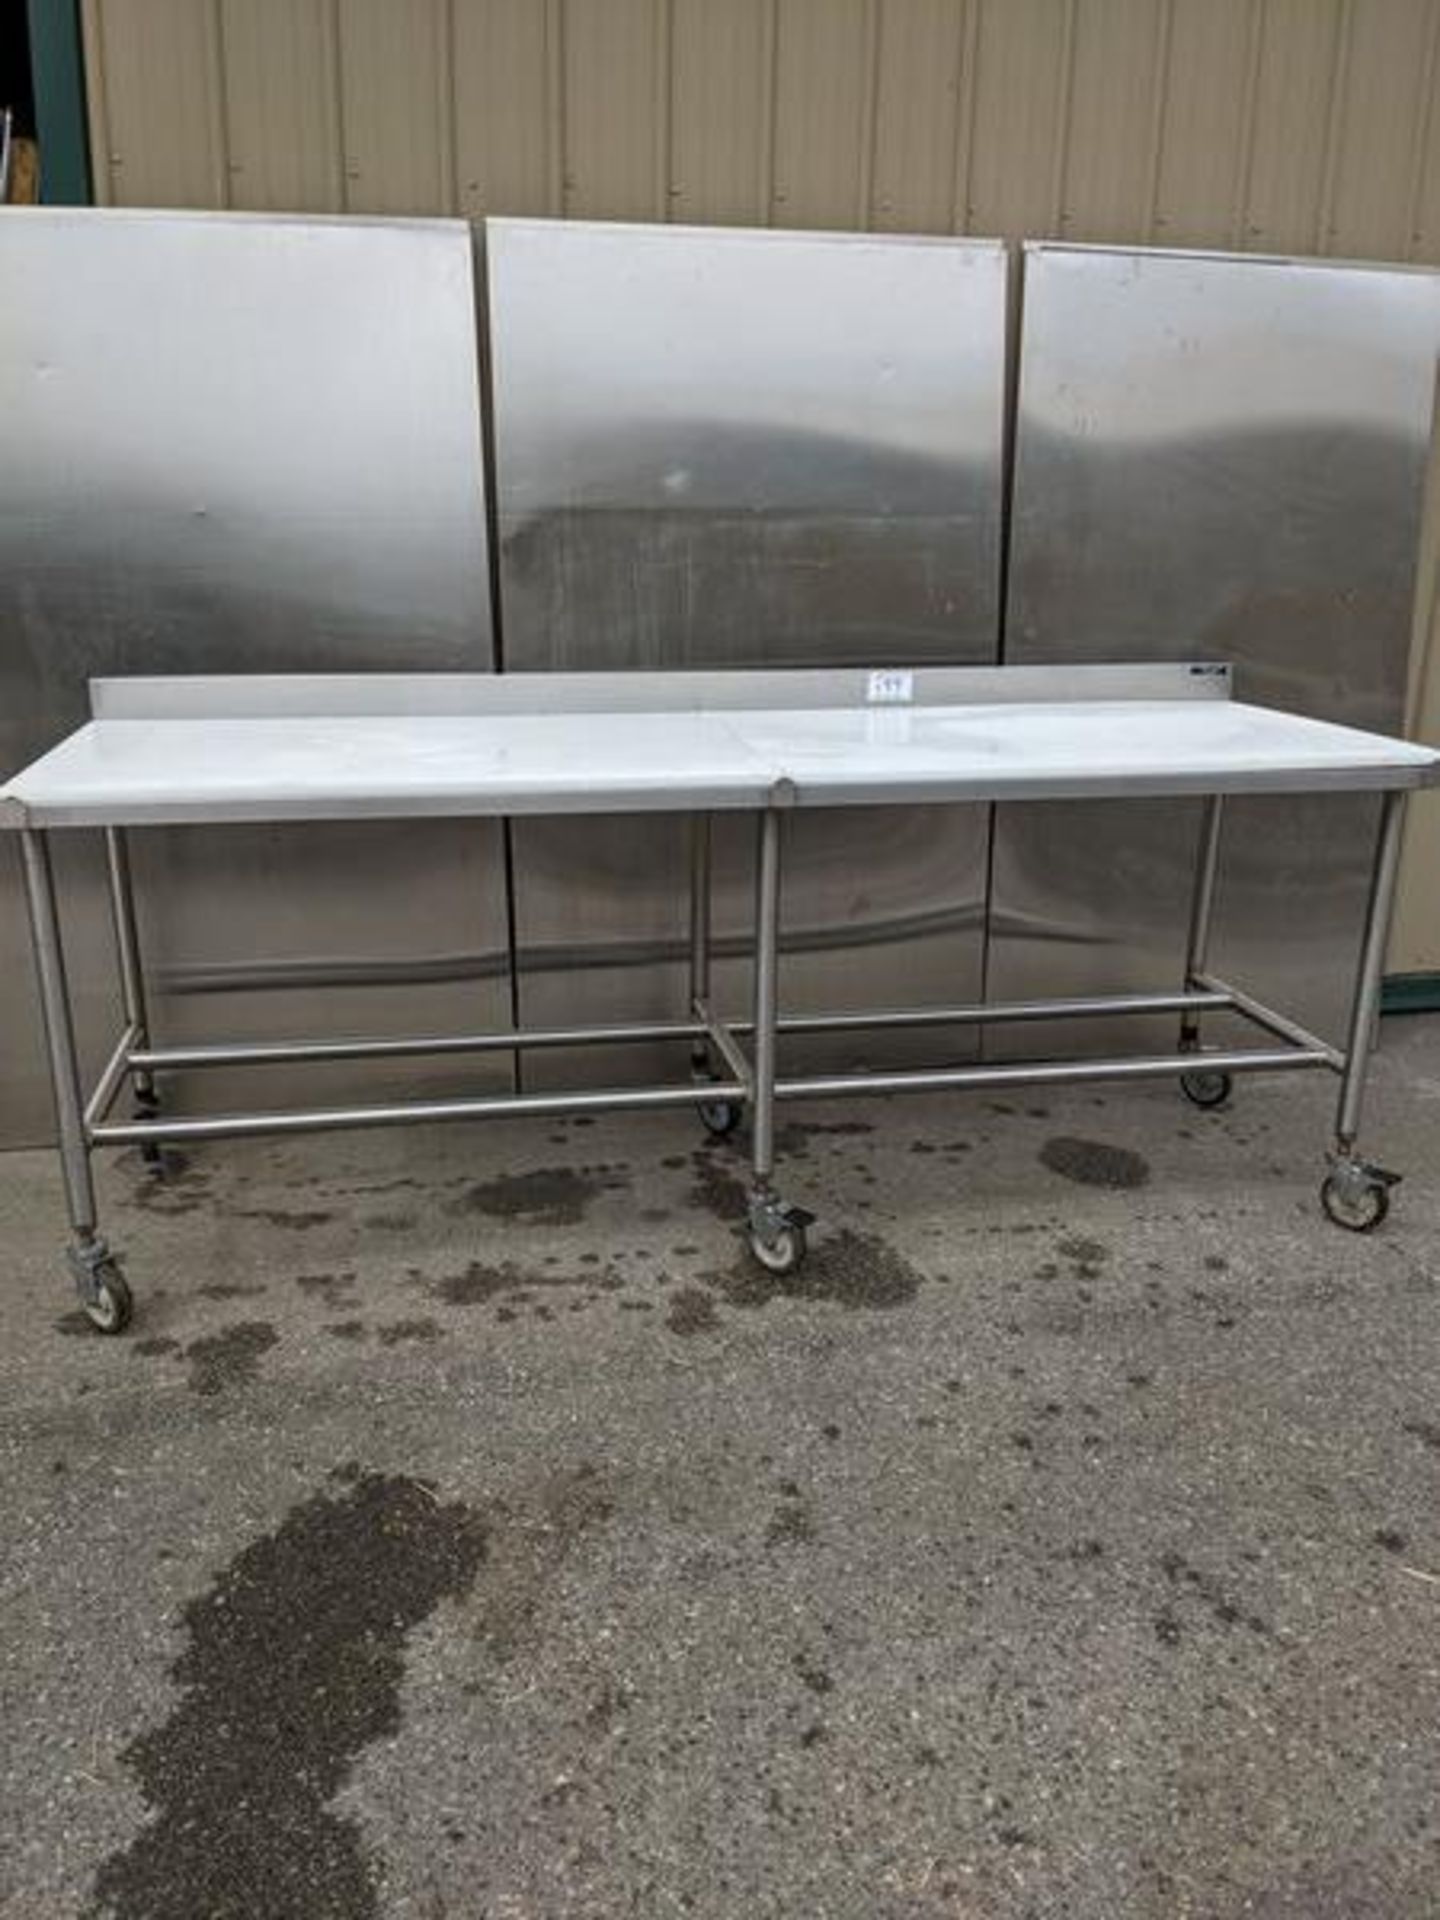 Approx 96" Stainless Steel Cutting Table on Casters